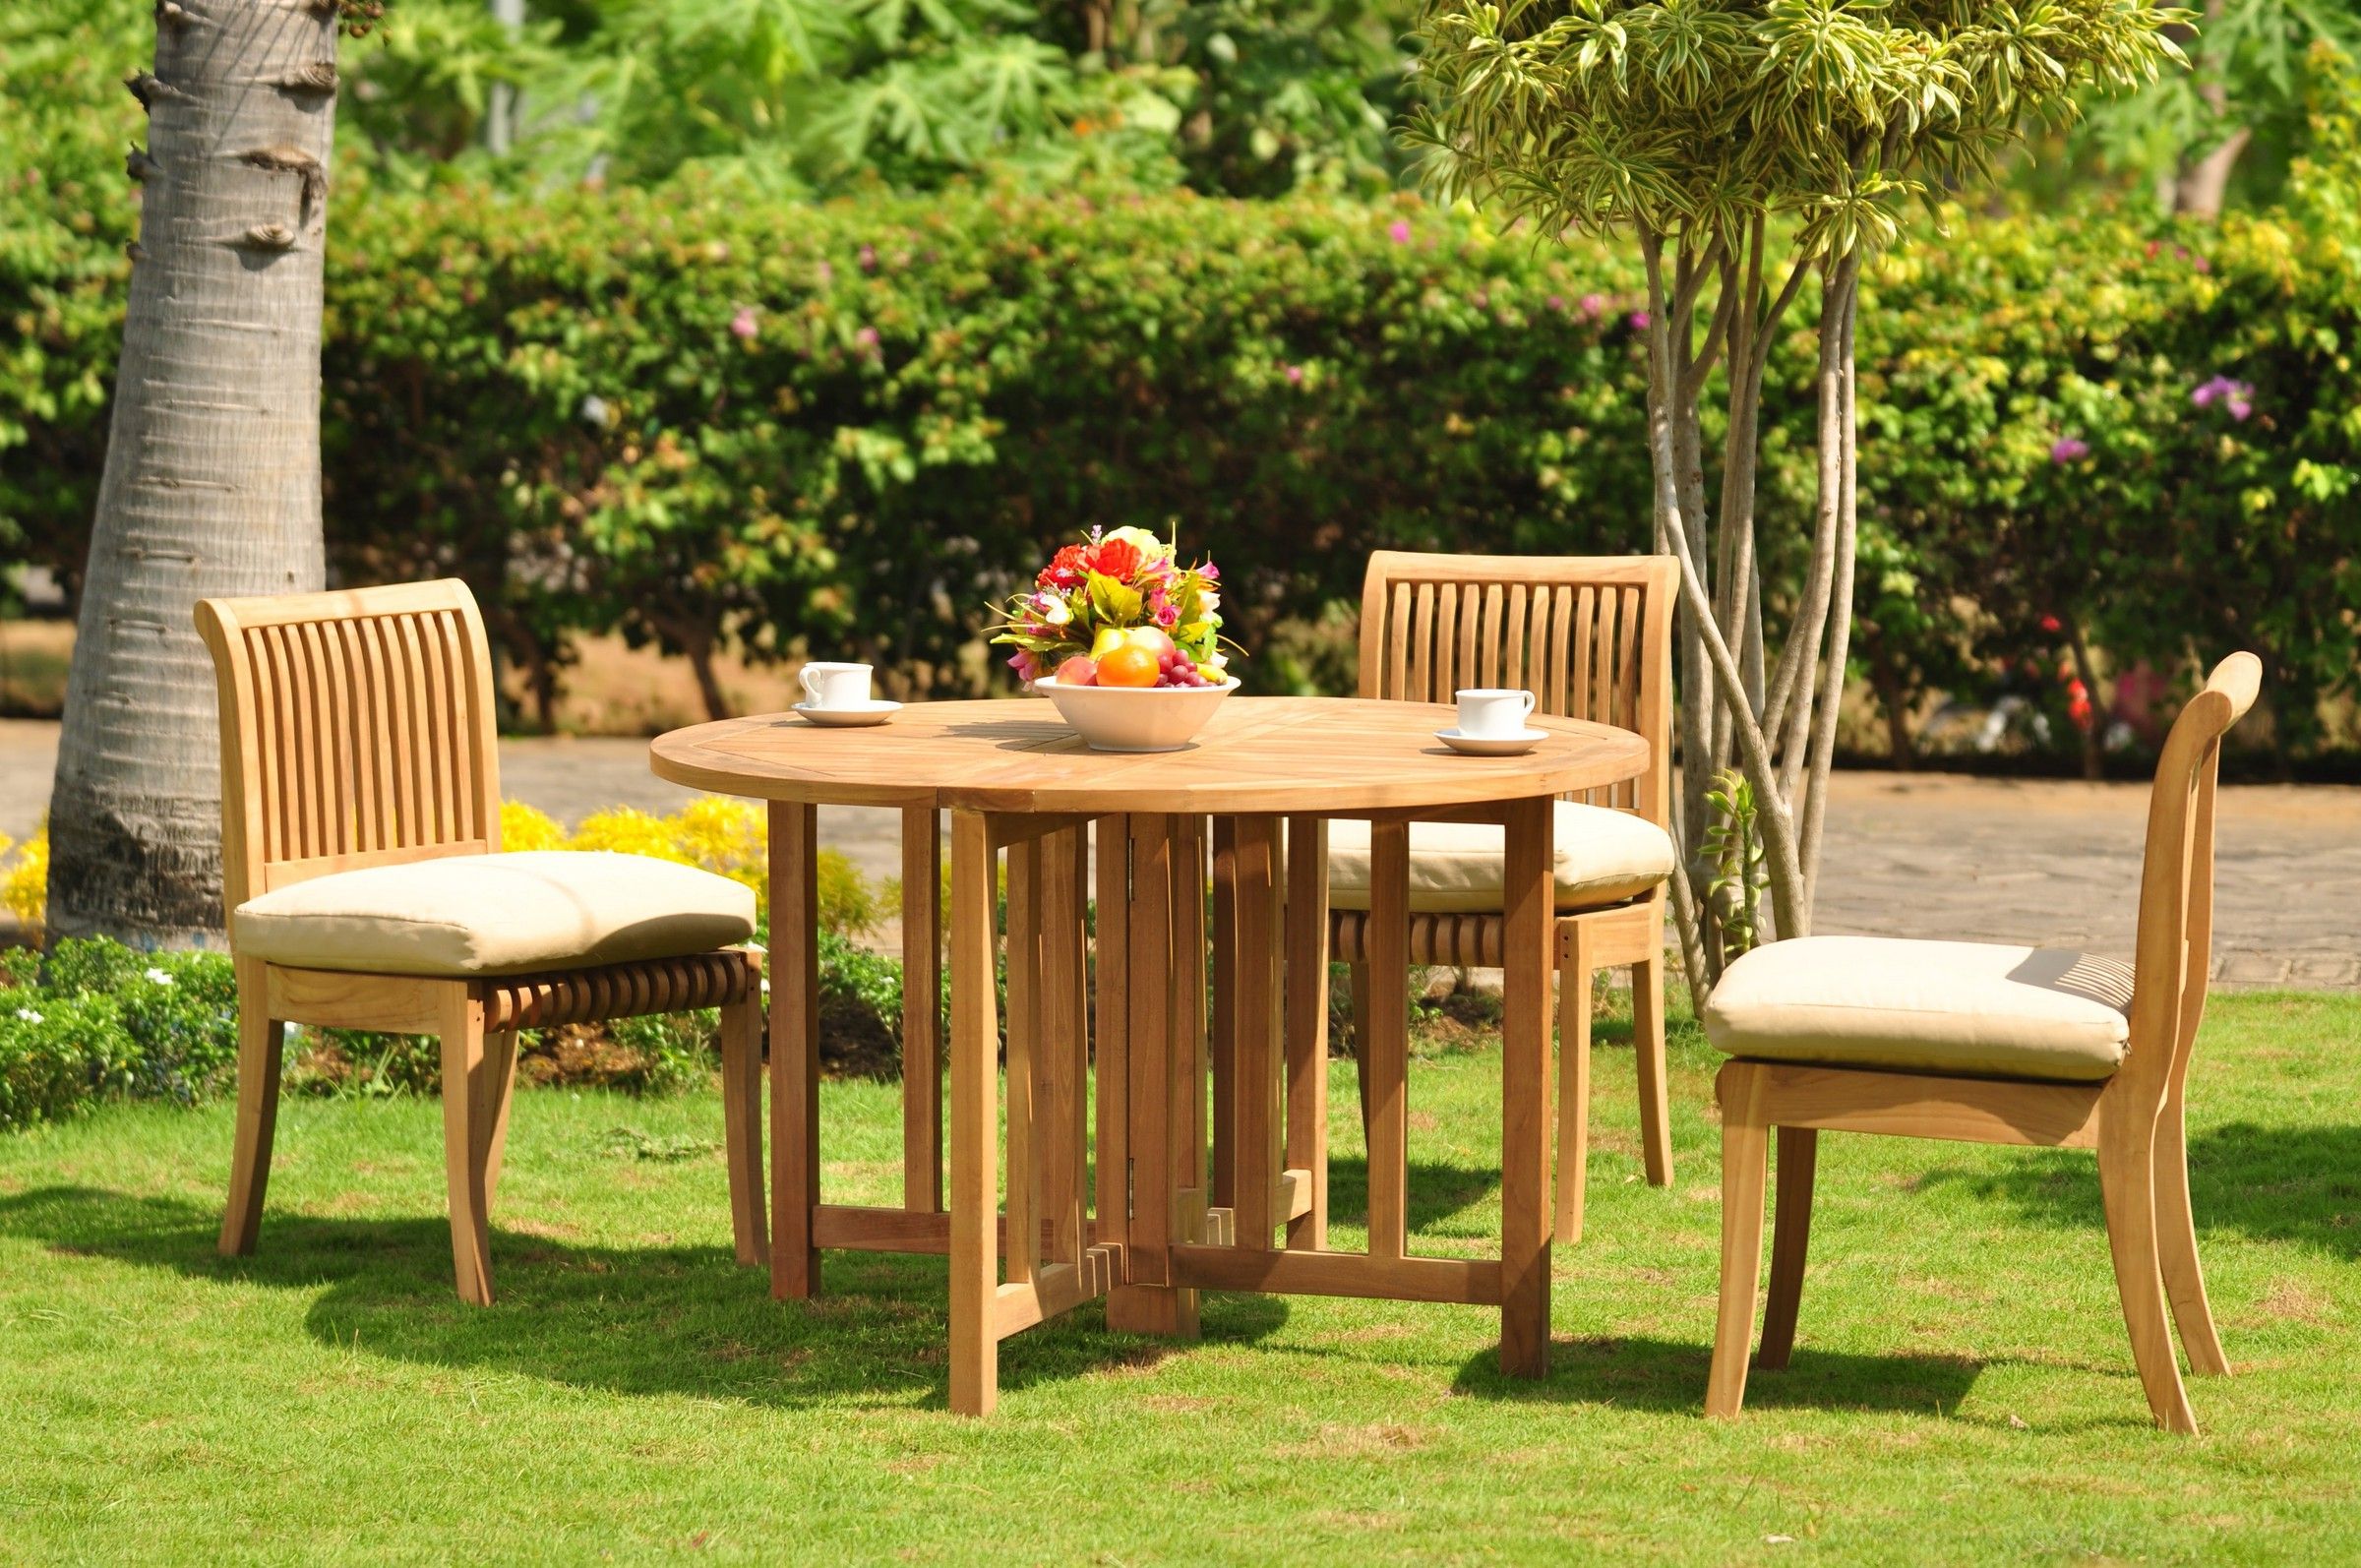 Teak Armchair Round Patio Dining Sets Regarding 2019 Teak Dining Set: 3 Seater 4 Pc: 48" Round Butterfly Folding Table And  (View 5 of 15)